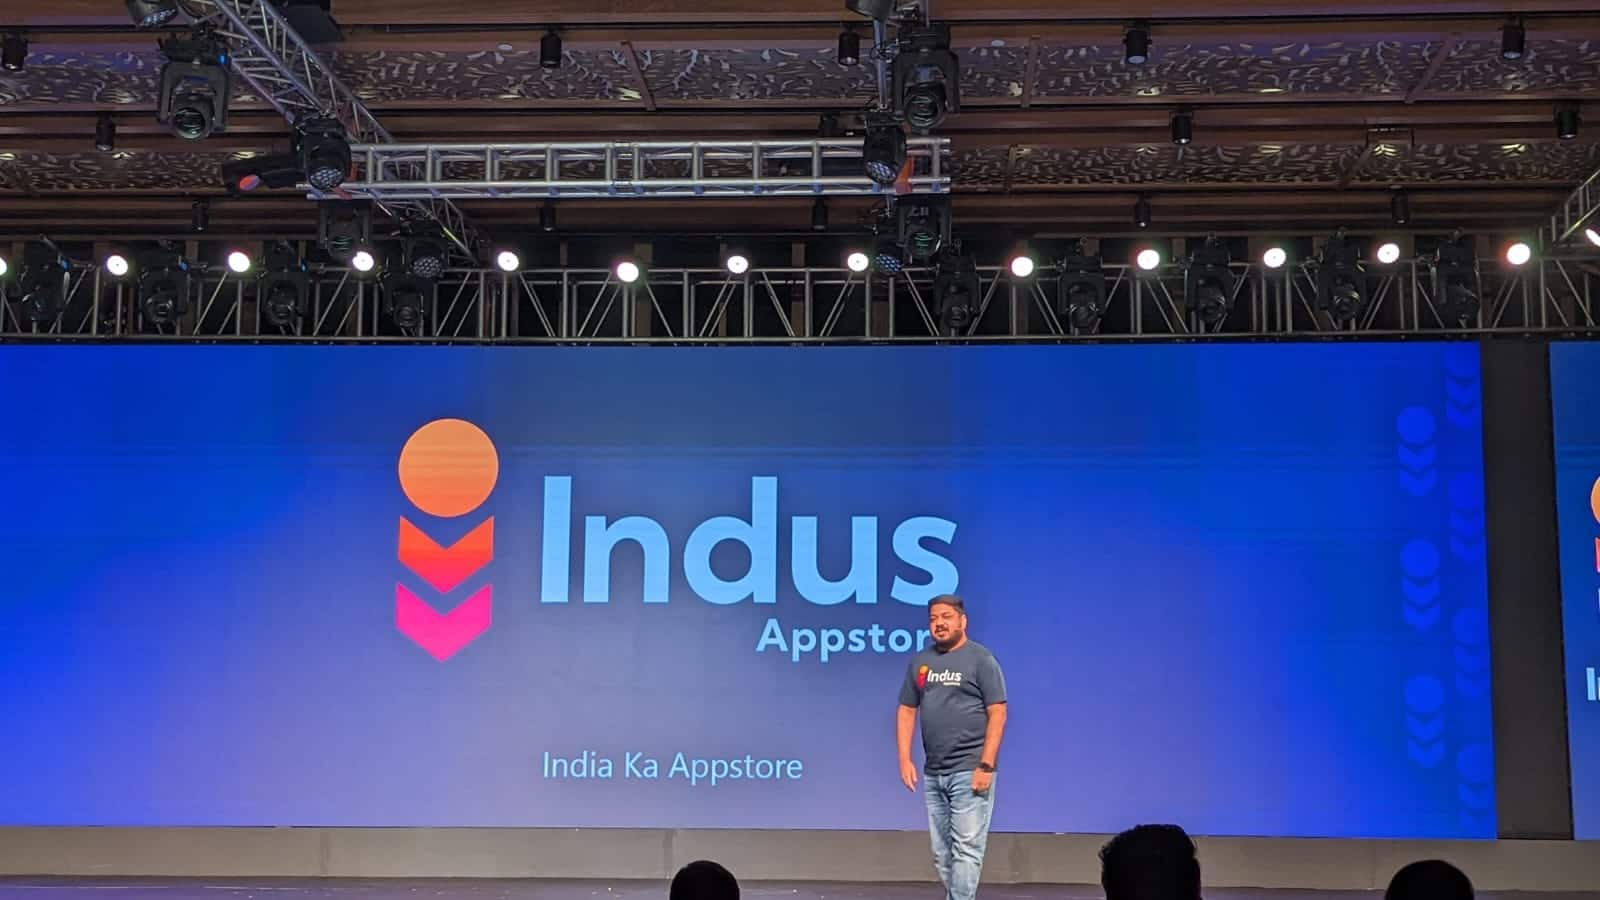 PhonePe's Indus Appstore introduces AI-powered voice search in 10 Indian languages - Moneycontrol